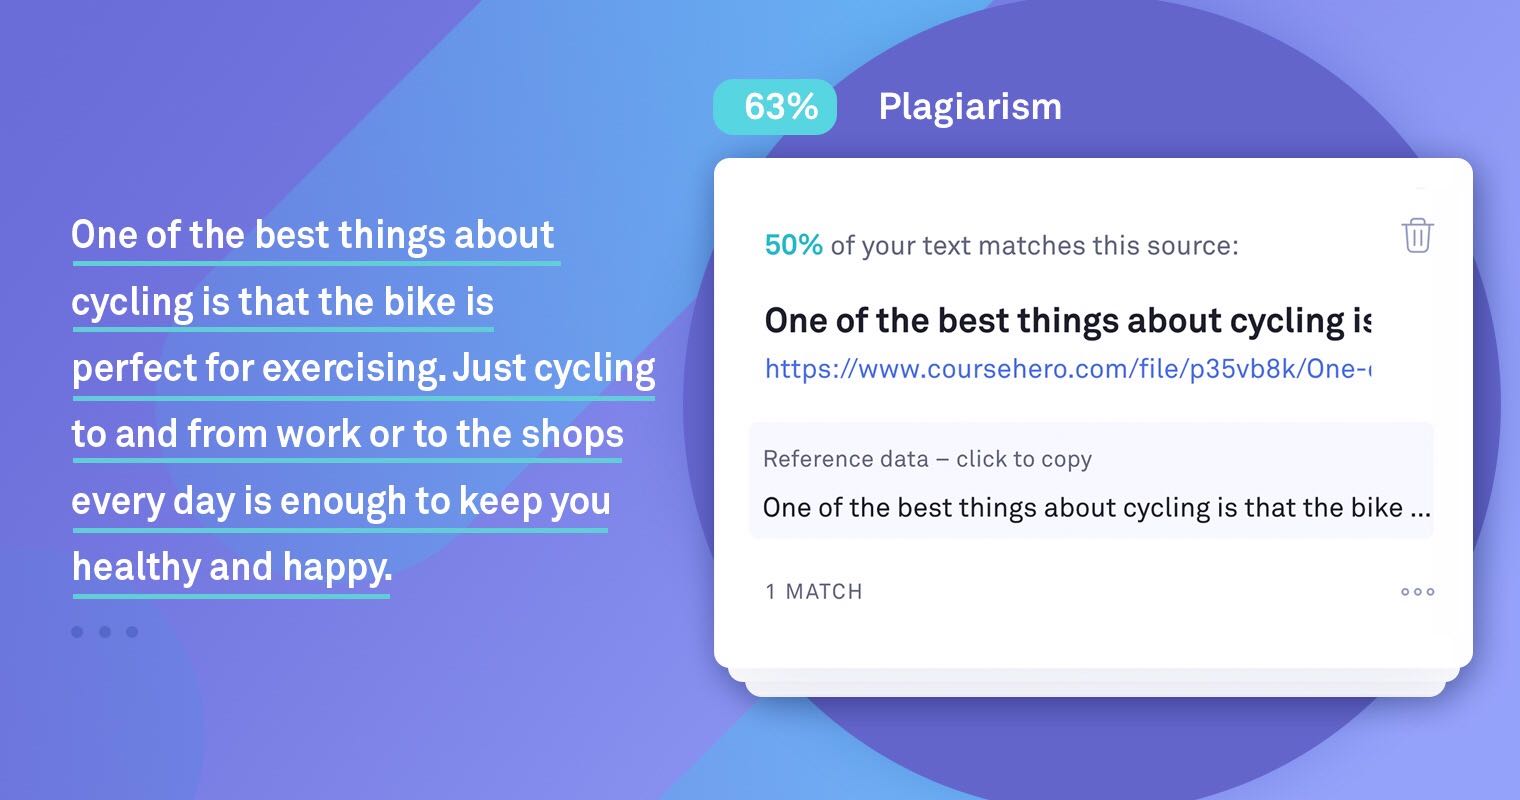 Is Grammarly's Plagiarism Checker Any Good? Is it Accurate?